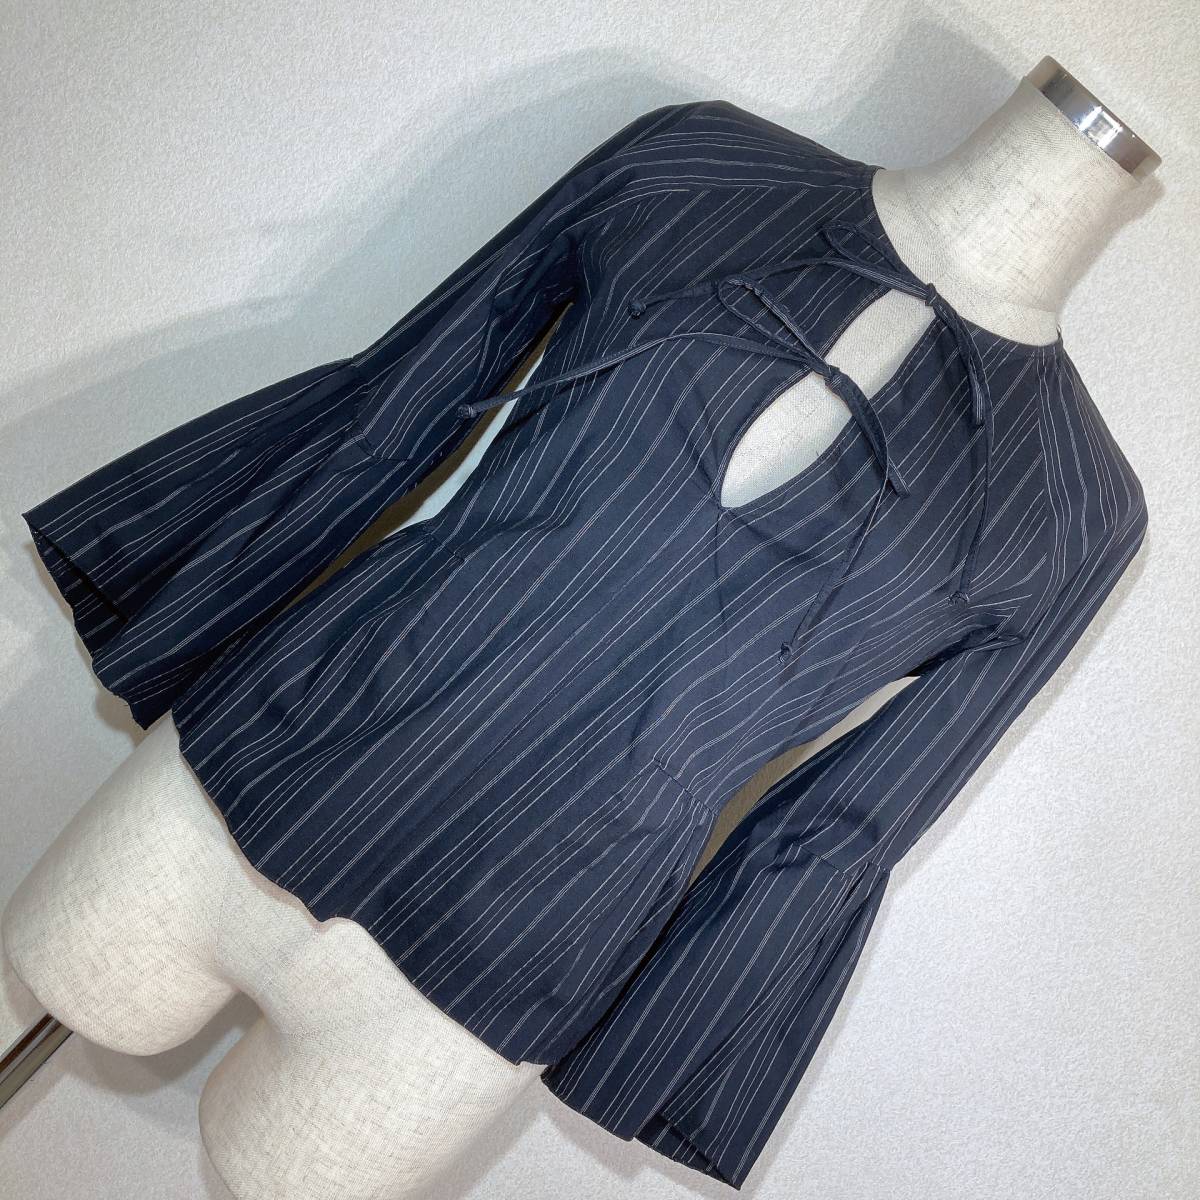 B433 beautiful goods!#GRIFONI Gris four ni* made in Italy * black * stripe * design blouse #40